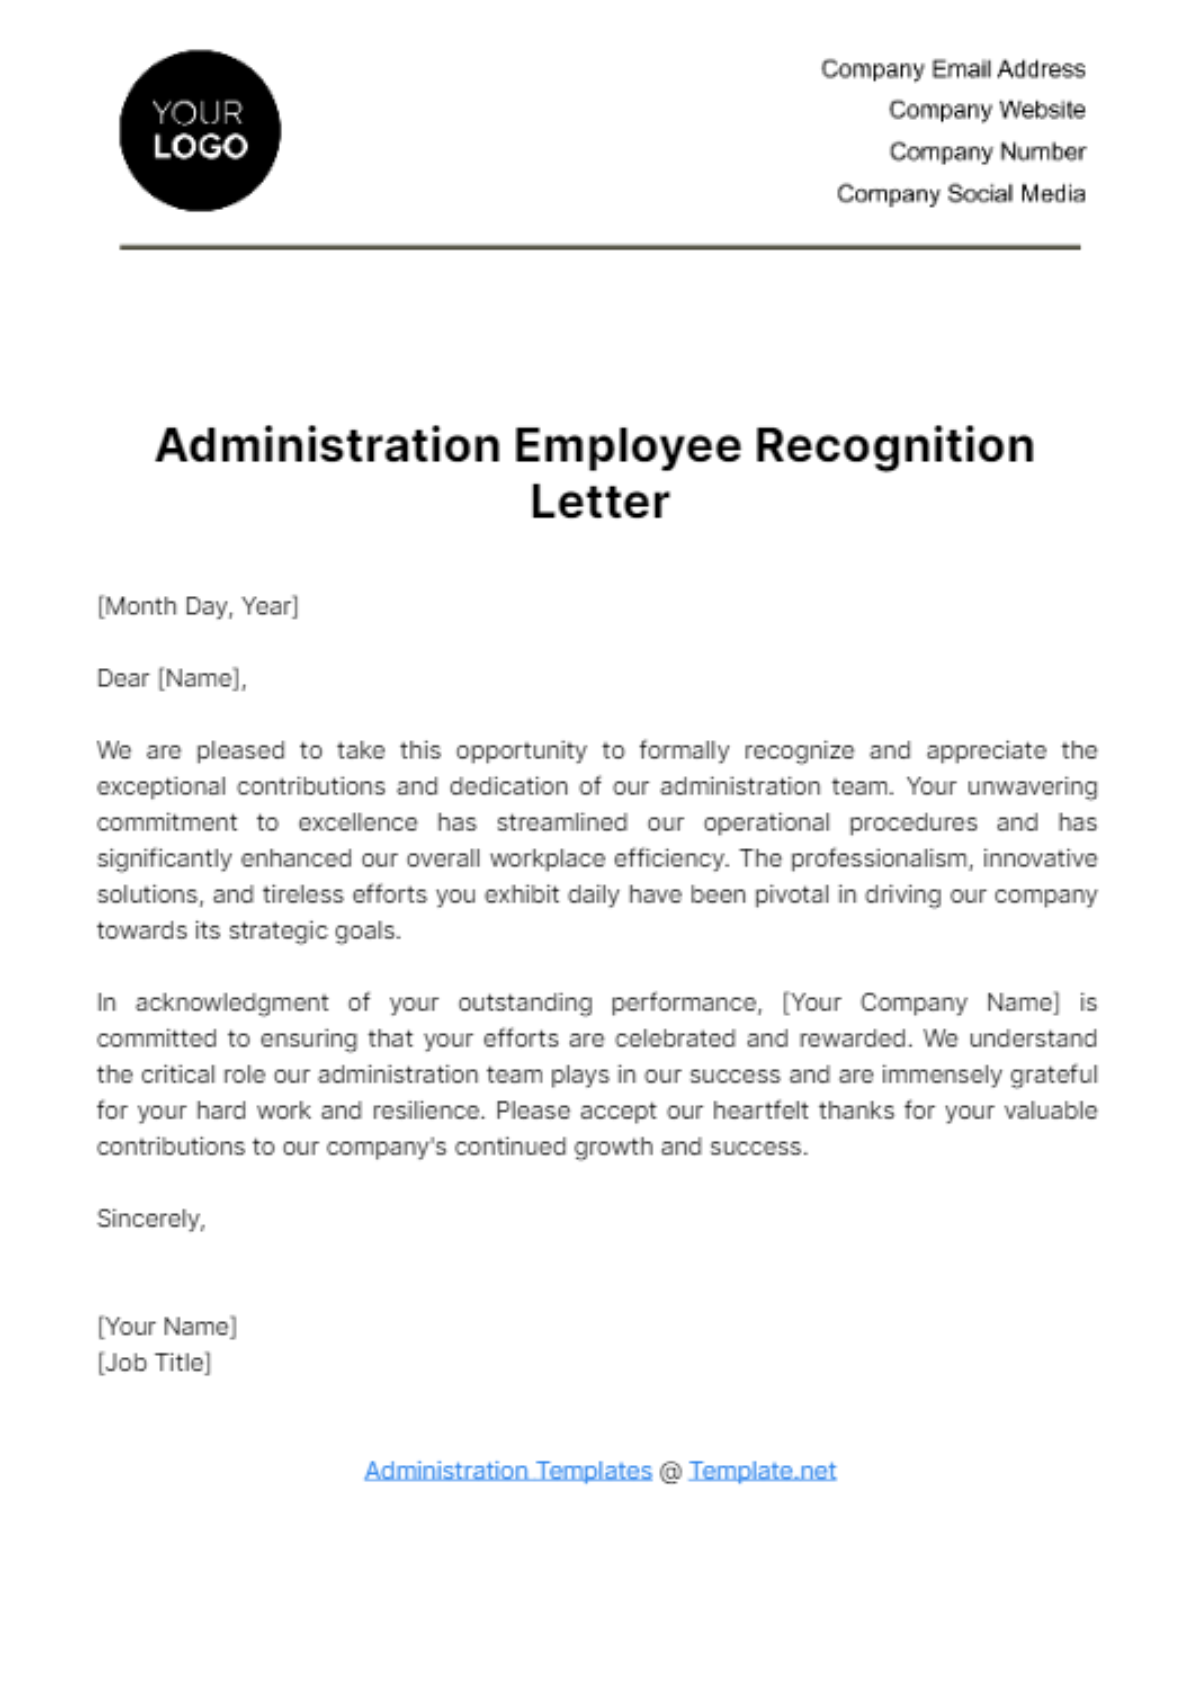 Administration Employee Recognition Letter Template